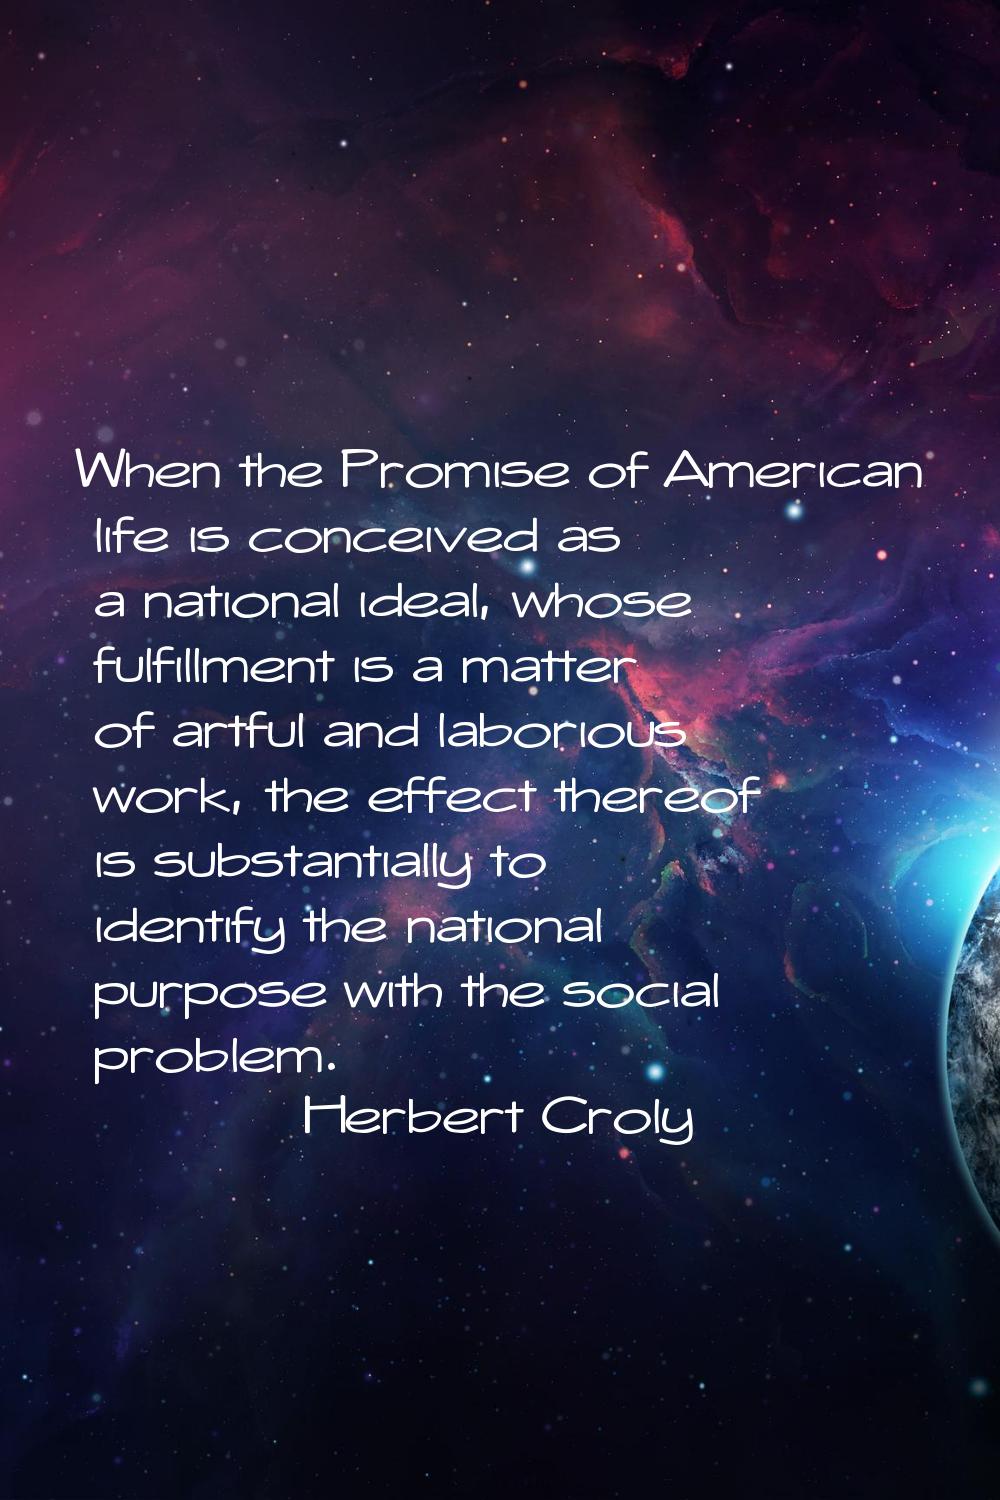 When the Promise of American life is conceived as a national ideal, whose fulfillment is a matter o